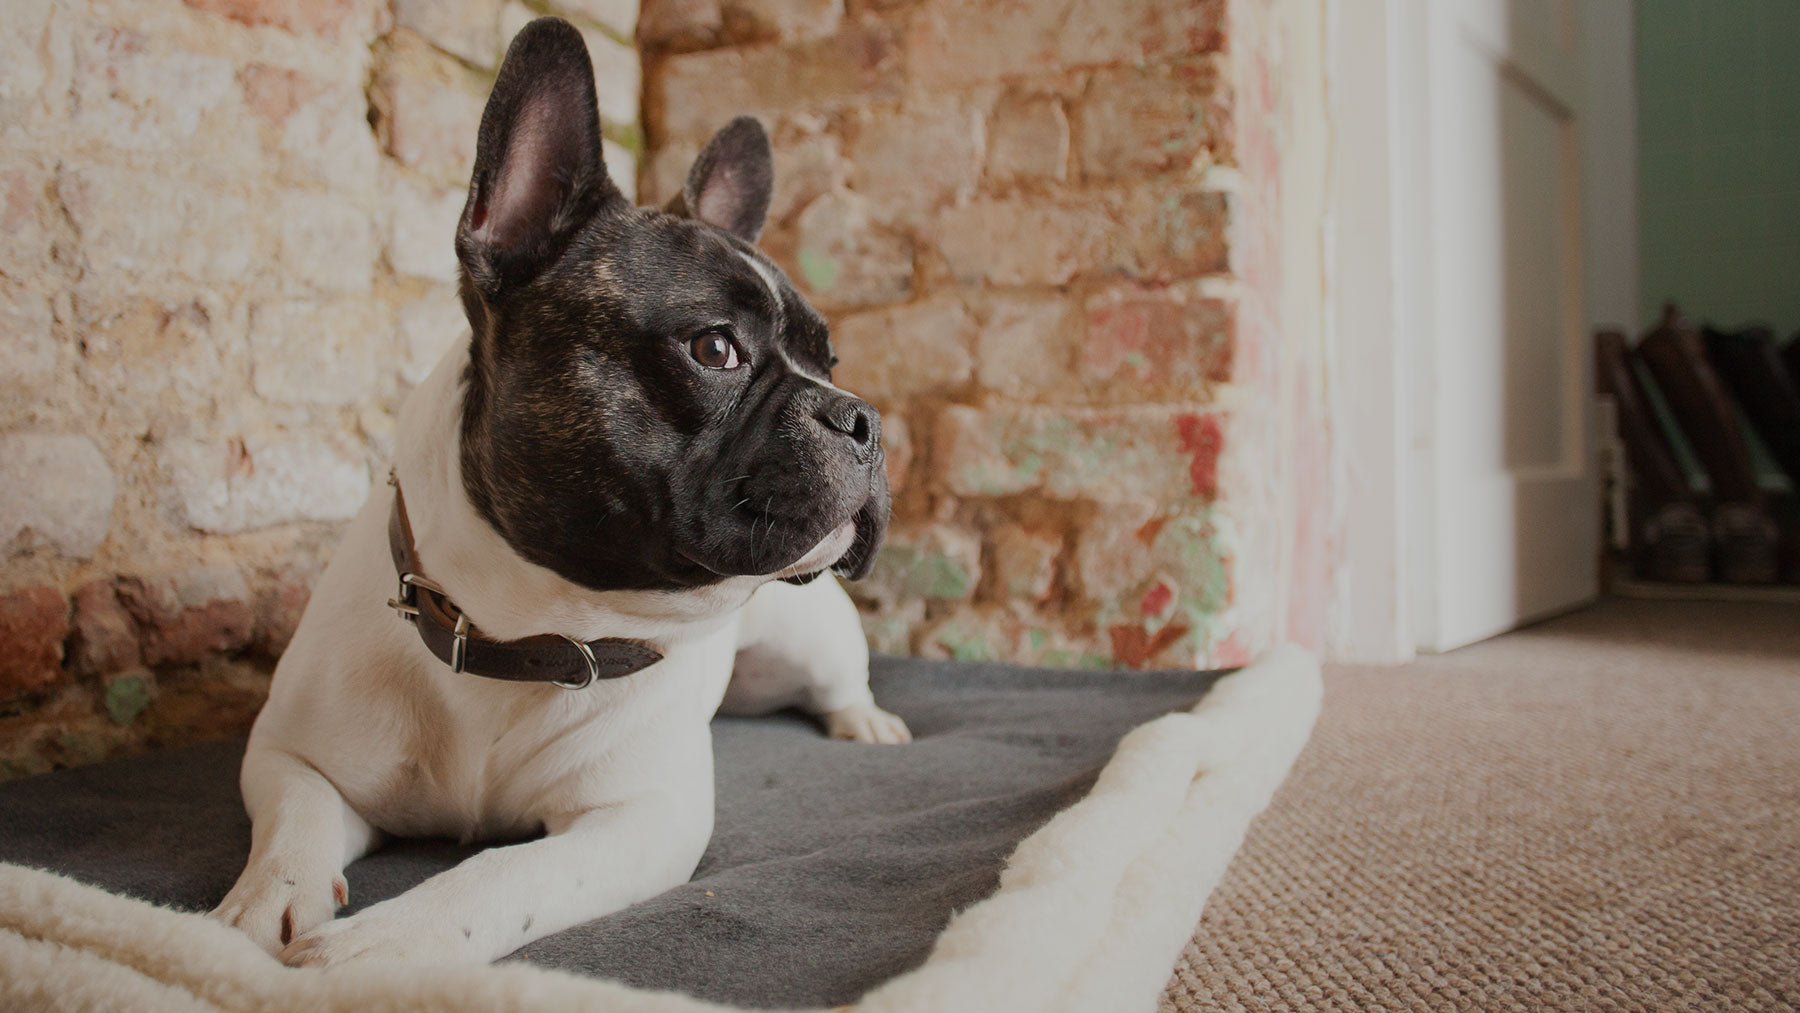 dog with leather collar sitting on a dog bed against a brick wall